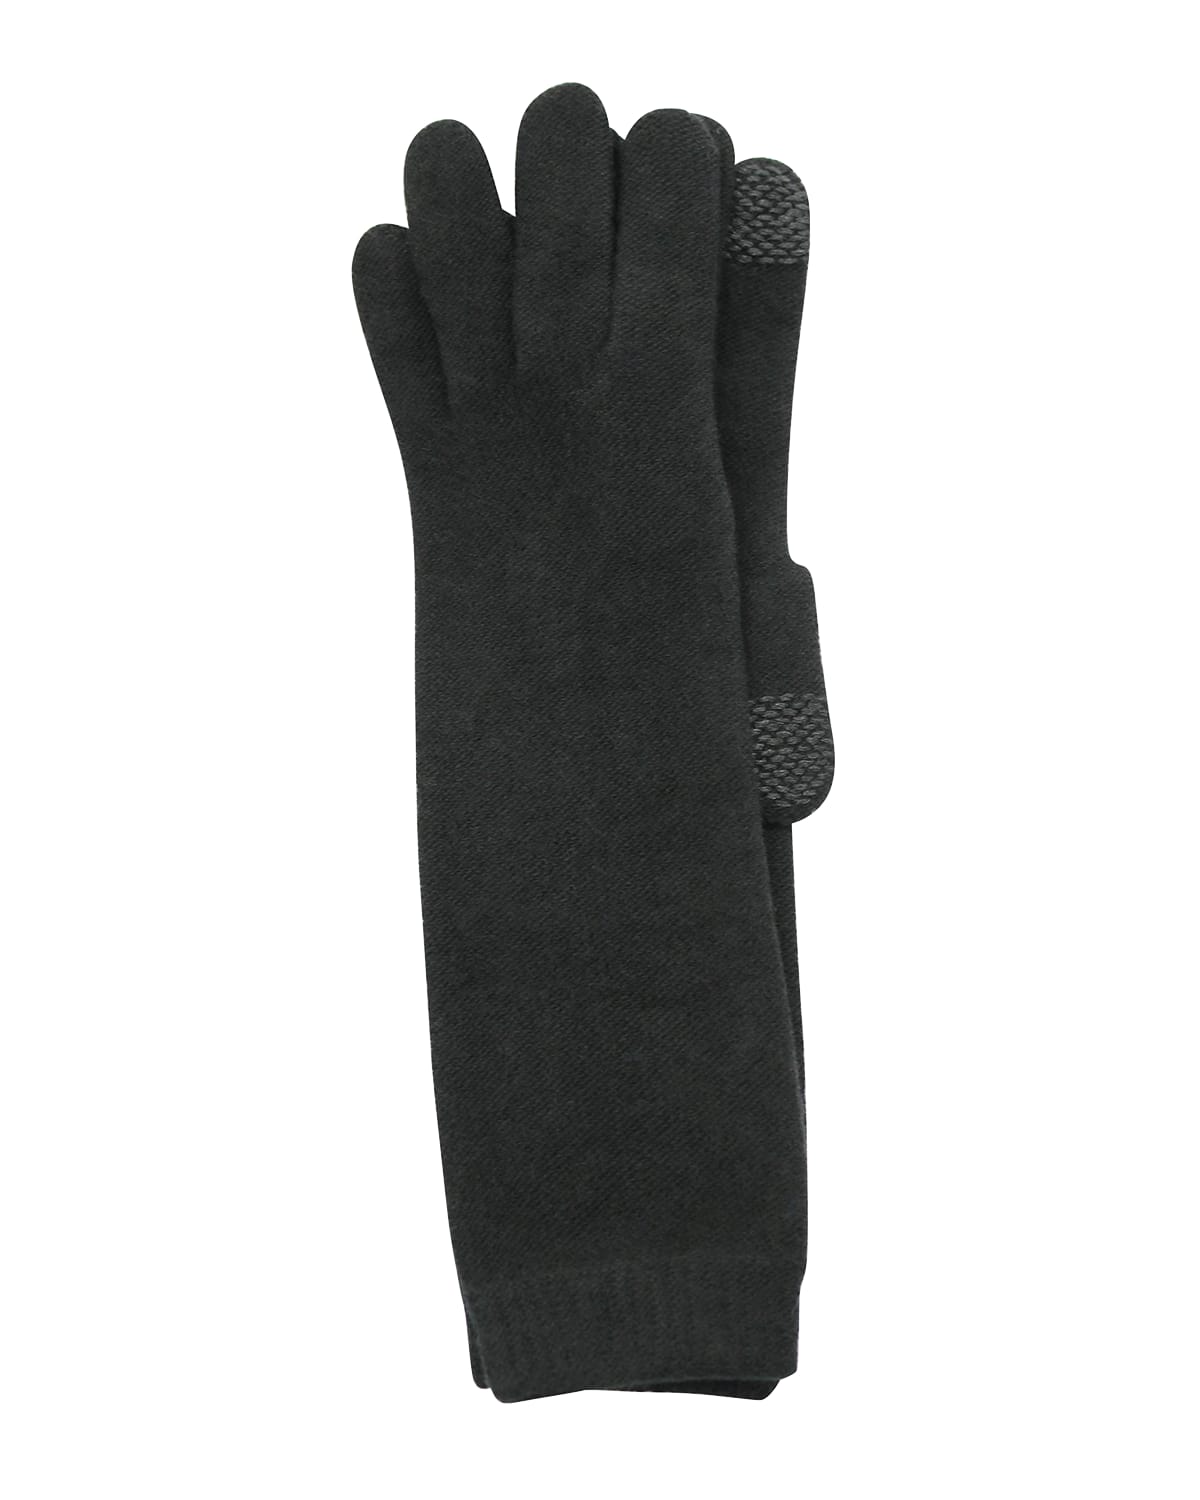 Men's Cashmere Knit Smartphone-Touch Gloves